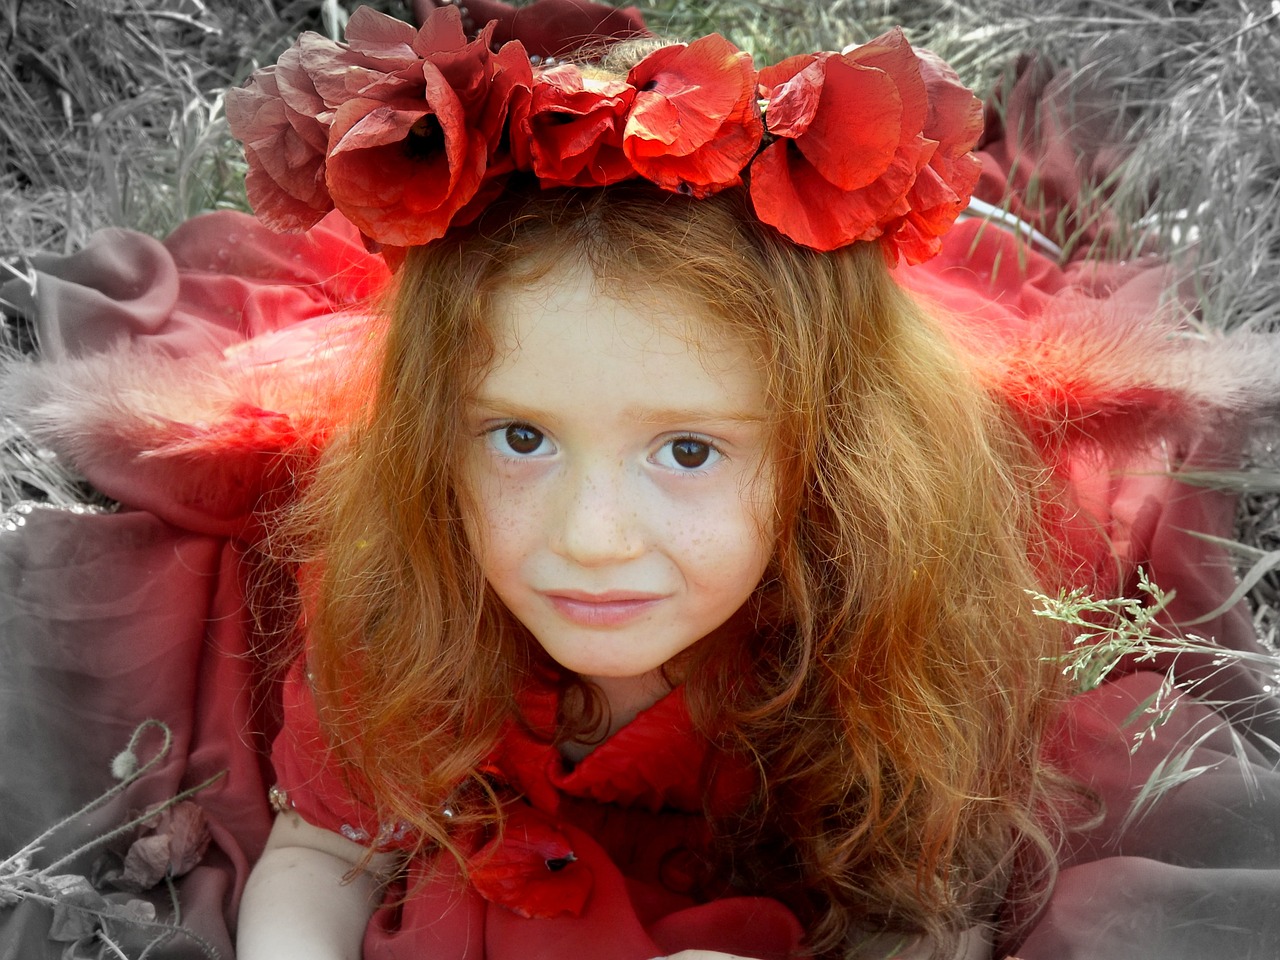 girl poppies red free photo